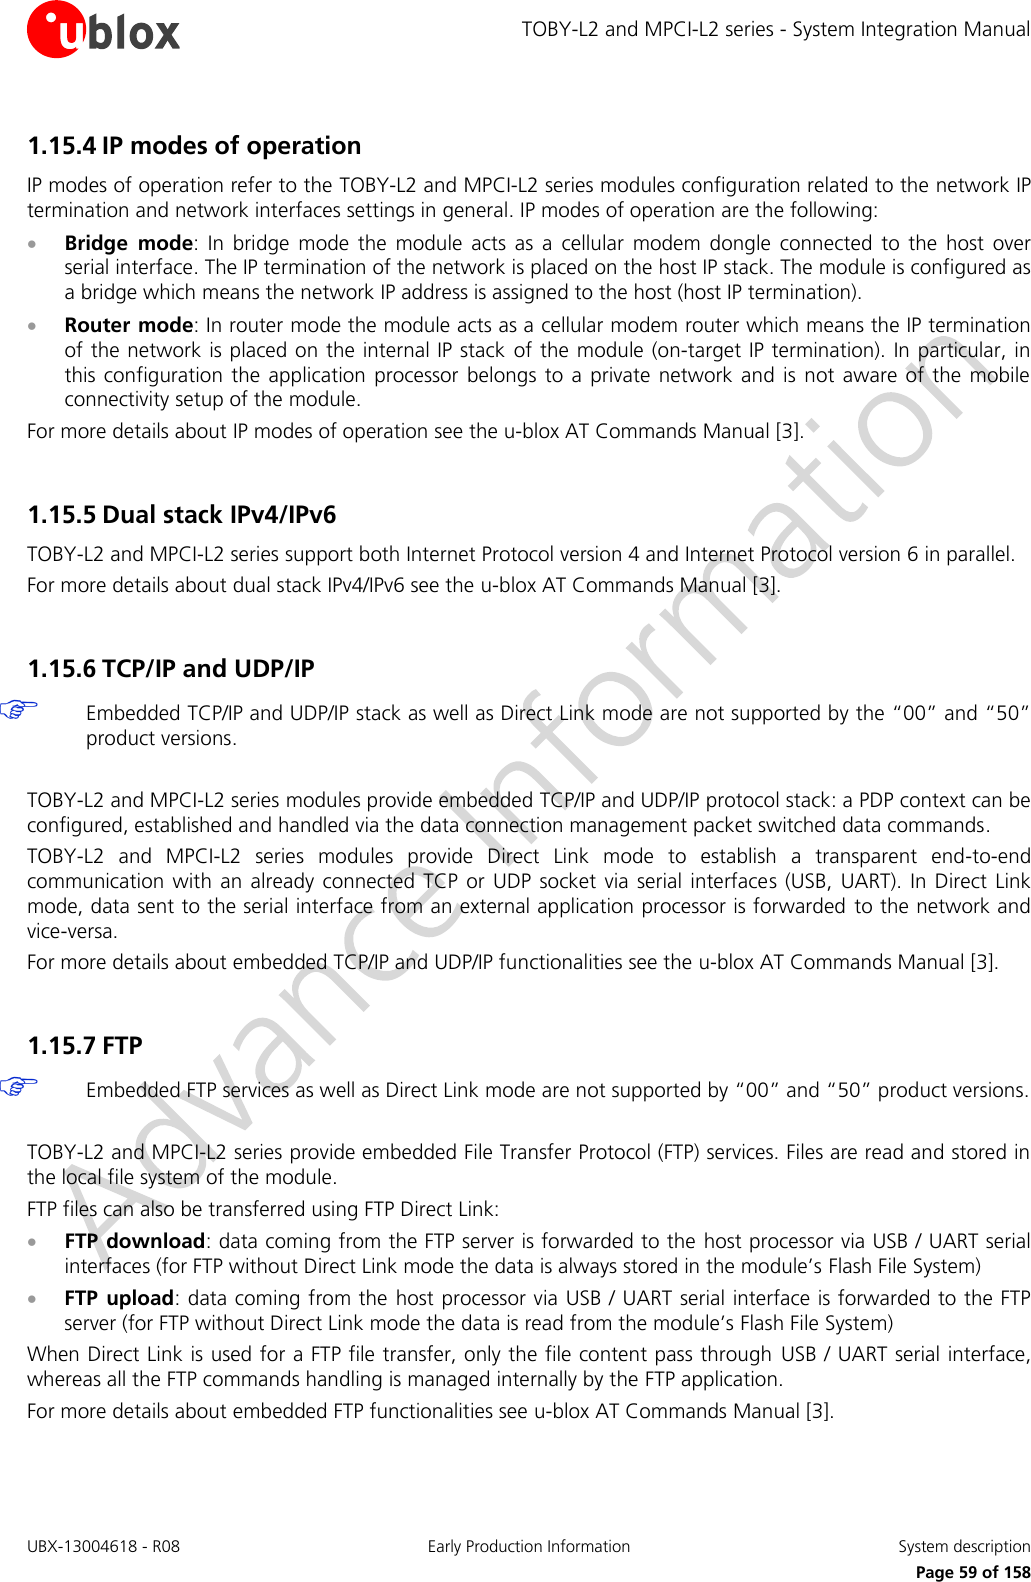 TOBY-L2 and MPCI-L2 series - System Integration Manual UBX-13004618 - R08  Early Production Information  System description     Page 59 of 158 1.15.4 IP modes of operation IP modes of operation refer to the TOBY-L2 and MPCI-L2 series modules configuration related to the network IP termination and network interfaces settings in general. IP modes of operation are the following:  Bridge  mode:  In  bridge  mode  the  module  acts  as  a  cellular  modem  dongle  connected  to  the  host  over serial interface. The IP termination of the network is placed on the host IP stack. The module is configured as a bridge which means the network IP address is assigned to the host (host IP termination).   Router mode: In router mode the module acts as a cellular modem router which means the IP termination of the network is placed on the internal IP stack of the module (on-target IP termination). In particular, in this  configuration the  application  processor  belongs to  a  private  network and  is  not  aware  of  the  mobile connectivity setup of the module. For more details about IP modes of operation see the u-blox AT Commands Manual [3].  1.15.5 Dual stack IPv4/IPv6 TOBY-L2 and MPCI-L2 series support both Internet Protocol version 4 and Internet Protocol version 6 in parallel. For more details about dual stack IPv4/IPv6 see the u-blox AT Commands Manual [3].  1.15.6 TCP/IP and UDP/IP  Embedded TCP/IP and UDP/IP stack as well as Direct Link mode are not supported by the “00” and “50” product versions.  TOBY-L2 and MPCI-L2 series modules provide embedded TCP/IP and UDP/IP protocol stack: a PDP context can be configured, established and handled via the data connection management packet switched data commands.  TOBY-L2  and  MPCI-L2  series  modules  provide  Direct  Link  mode  to  establish  a  transparent  end-to-end communication  with an  already  connected  TCP  or UDP  socket via  serial  interfaces (USB,  UART).  In  Direct  Link mode, data sent to the serial interface from an external application processor is forwarded  to the network and vice-versa. For more details about embedded TCP/IP and UDP/IP functionalities see the u-blox AT Commands Manual [3].  1.15.7 FTP   Embedded FTP services as well as Direct Link mode are not supported by “00” and “50” product versions.  TOBY-L2 and MPCI-L2 series provide embedded File Transfer Protocol (FTP) services. Files are read and stored in the local file system of the module. FTP files can also be transferred using FTP Direct Link:  FTP download: data coming from the FTP server is forwarded to the host processor via USB / UART serial interfaces (for FTP without Direct Link mode the data is always stored in the module’s Flash File System)  FTP  upload: data coming from the host processor via USB / UART serial interface is forwarded to the FTP server (for FTP without Direct Link mode the data is read from the module’s Flash File System) When Direct Link is used for a FTP file transfer, only the file content pass through  USB / UART serial interface, whereas all the FTP commands handling is managed internally by the FTP application. For more details about embedded FTP functionalities see u-blox AT Commands Manual [3].  